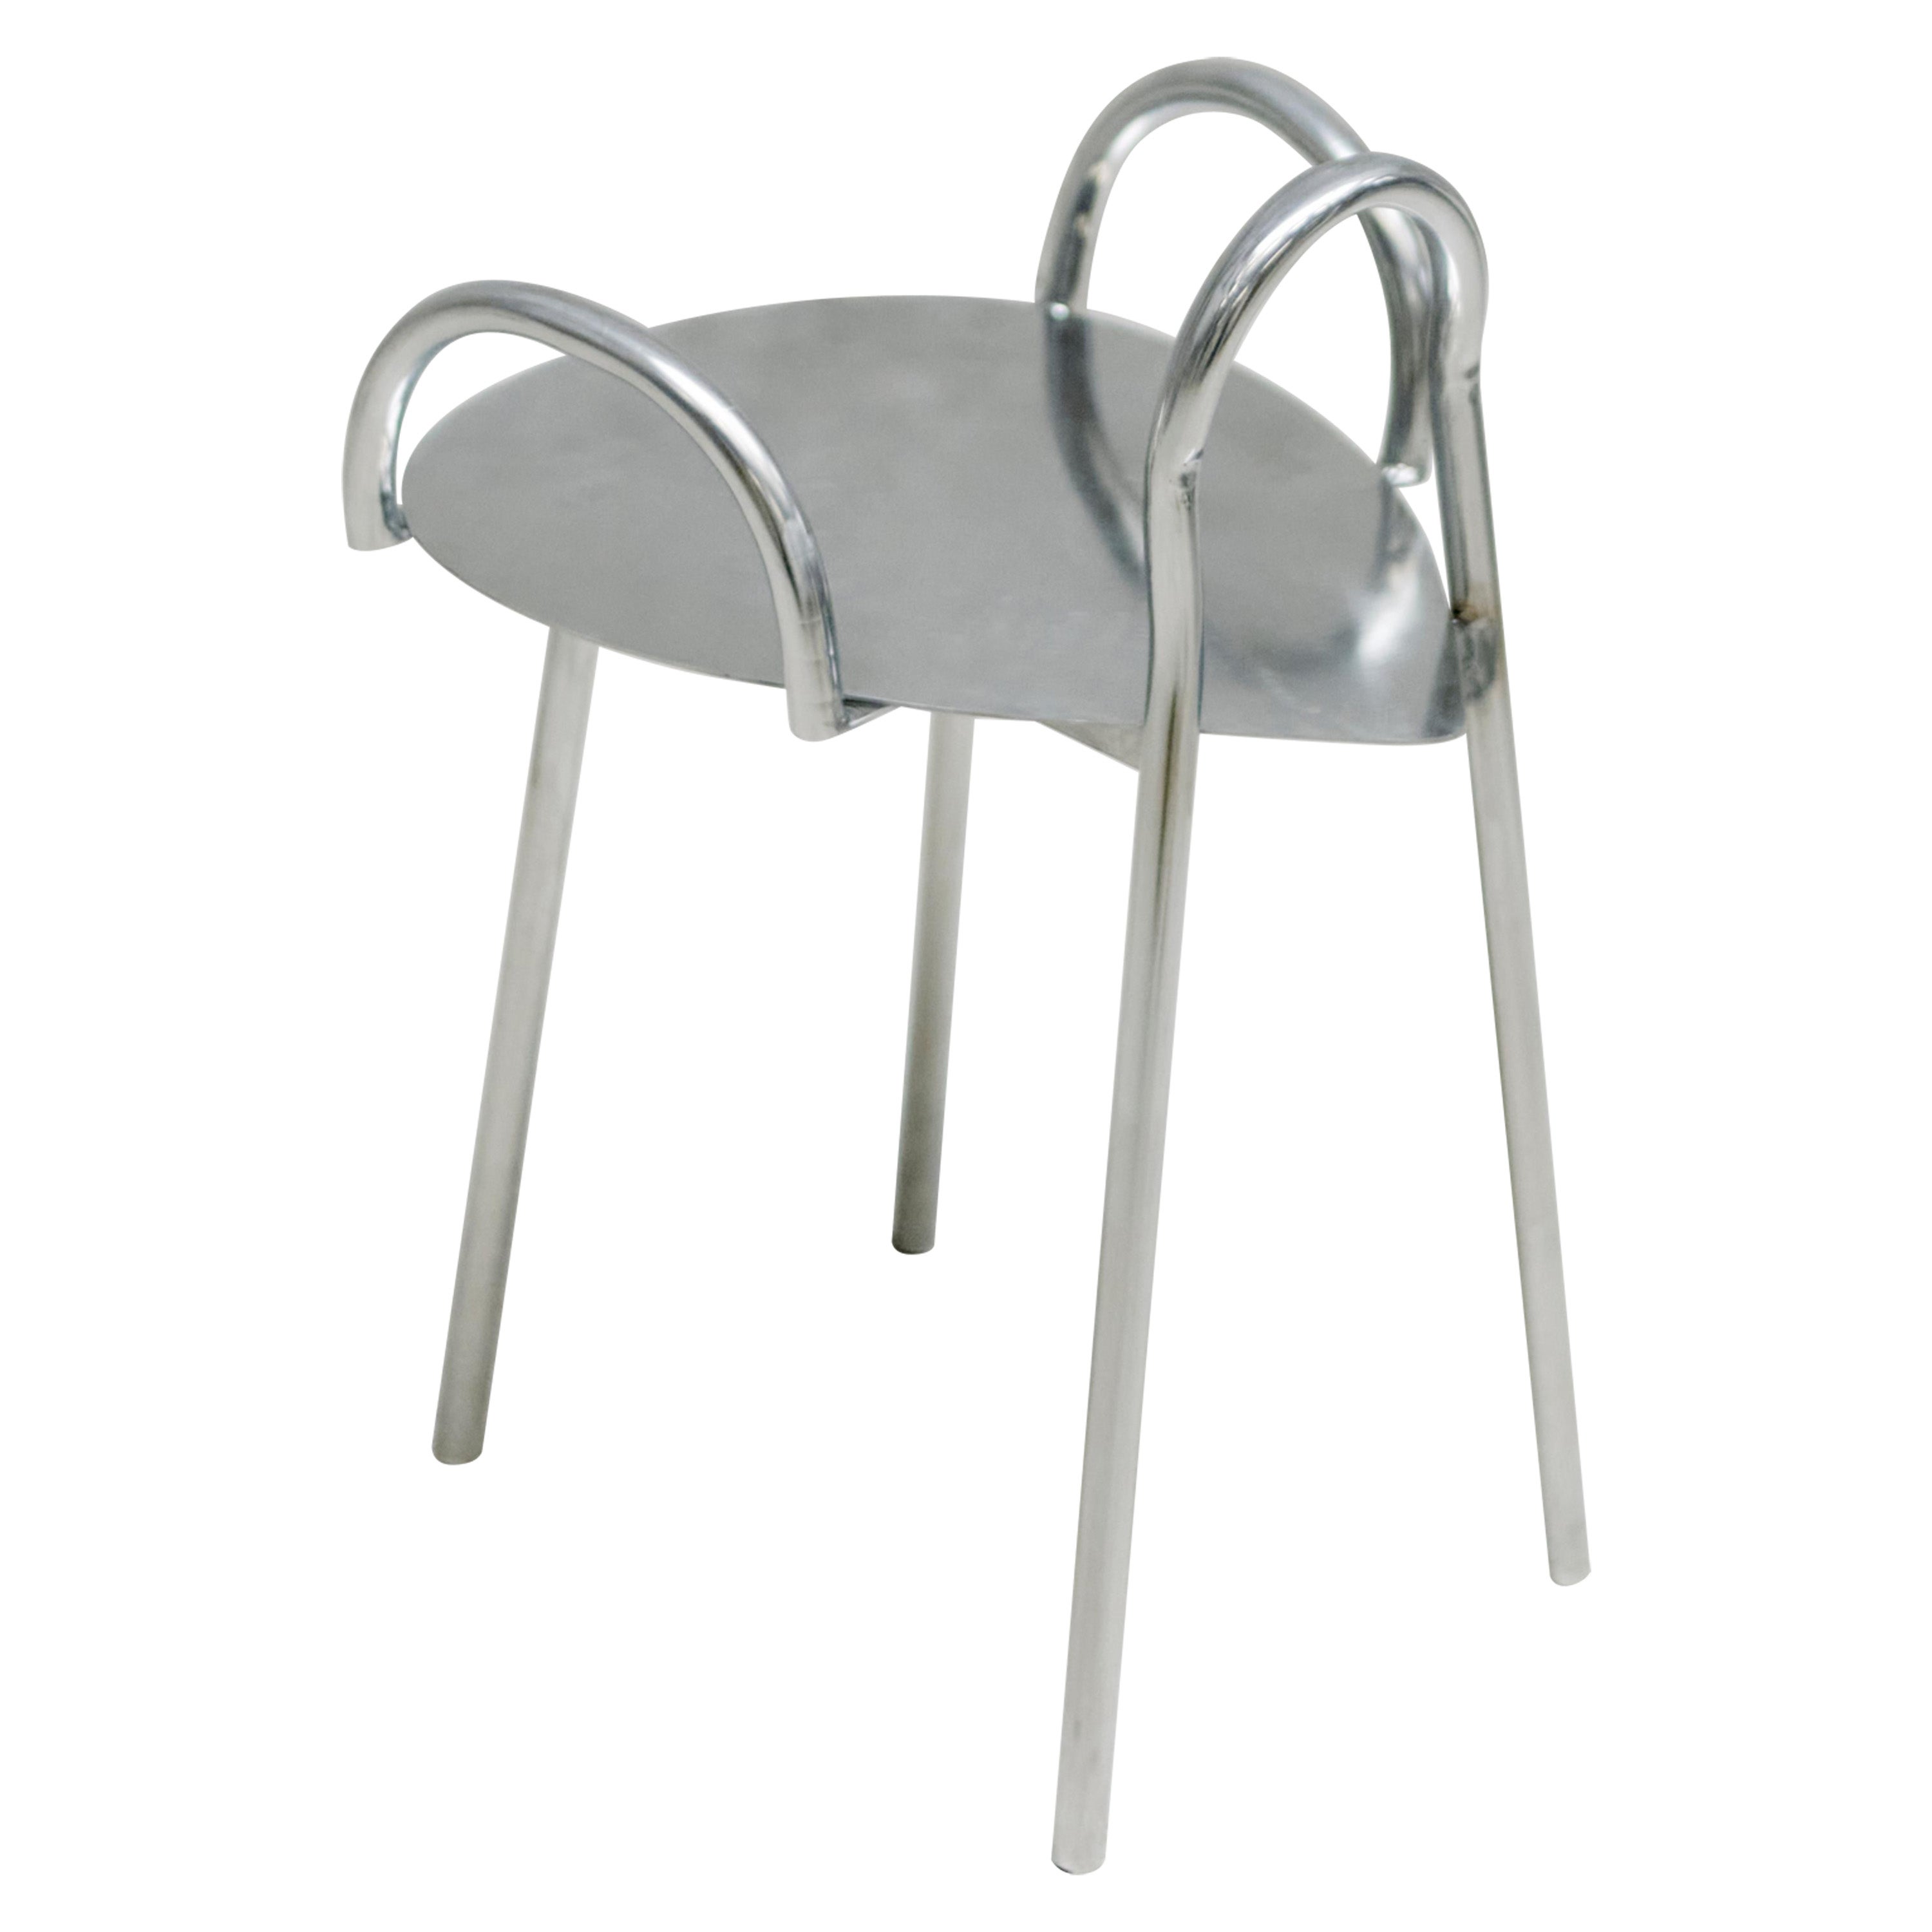 "Tumble" Chair in stainless steel tube and polished seat.